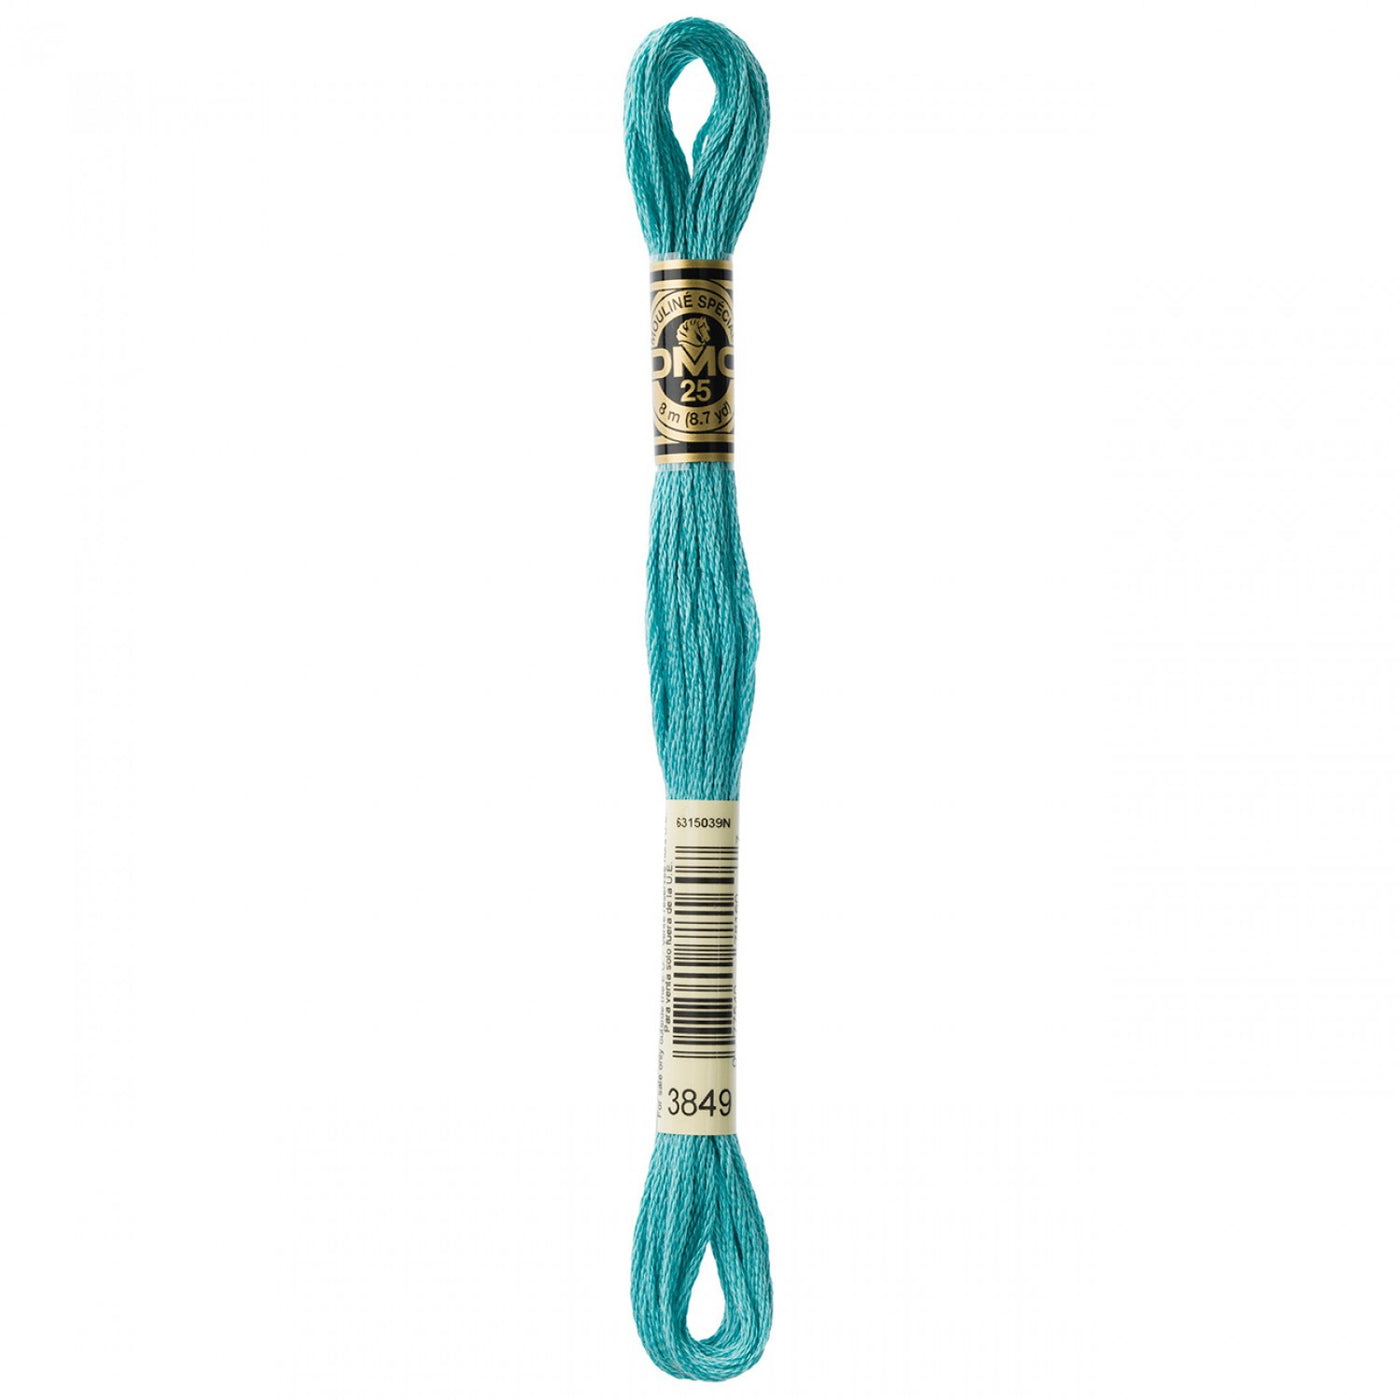 6-Strand Embroidery Floss 3849 Lt Teal Green (4515551445037)